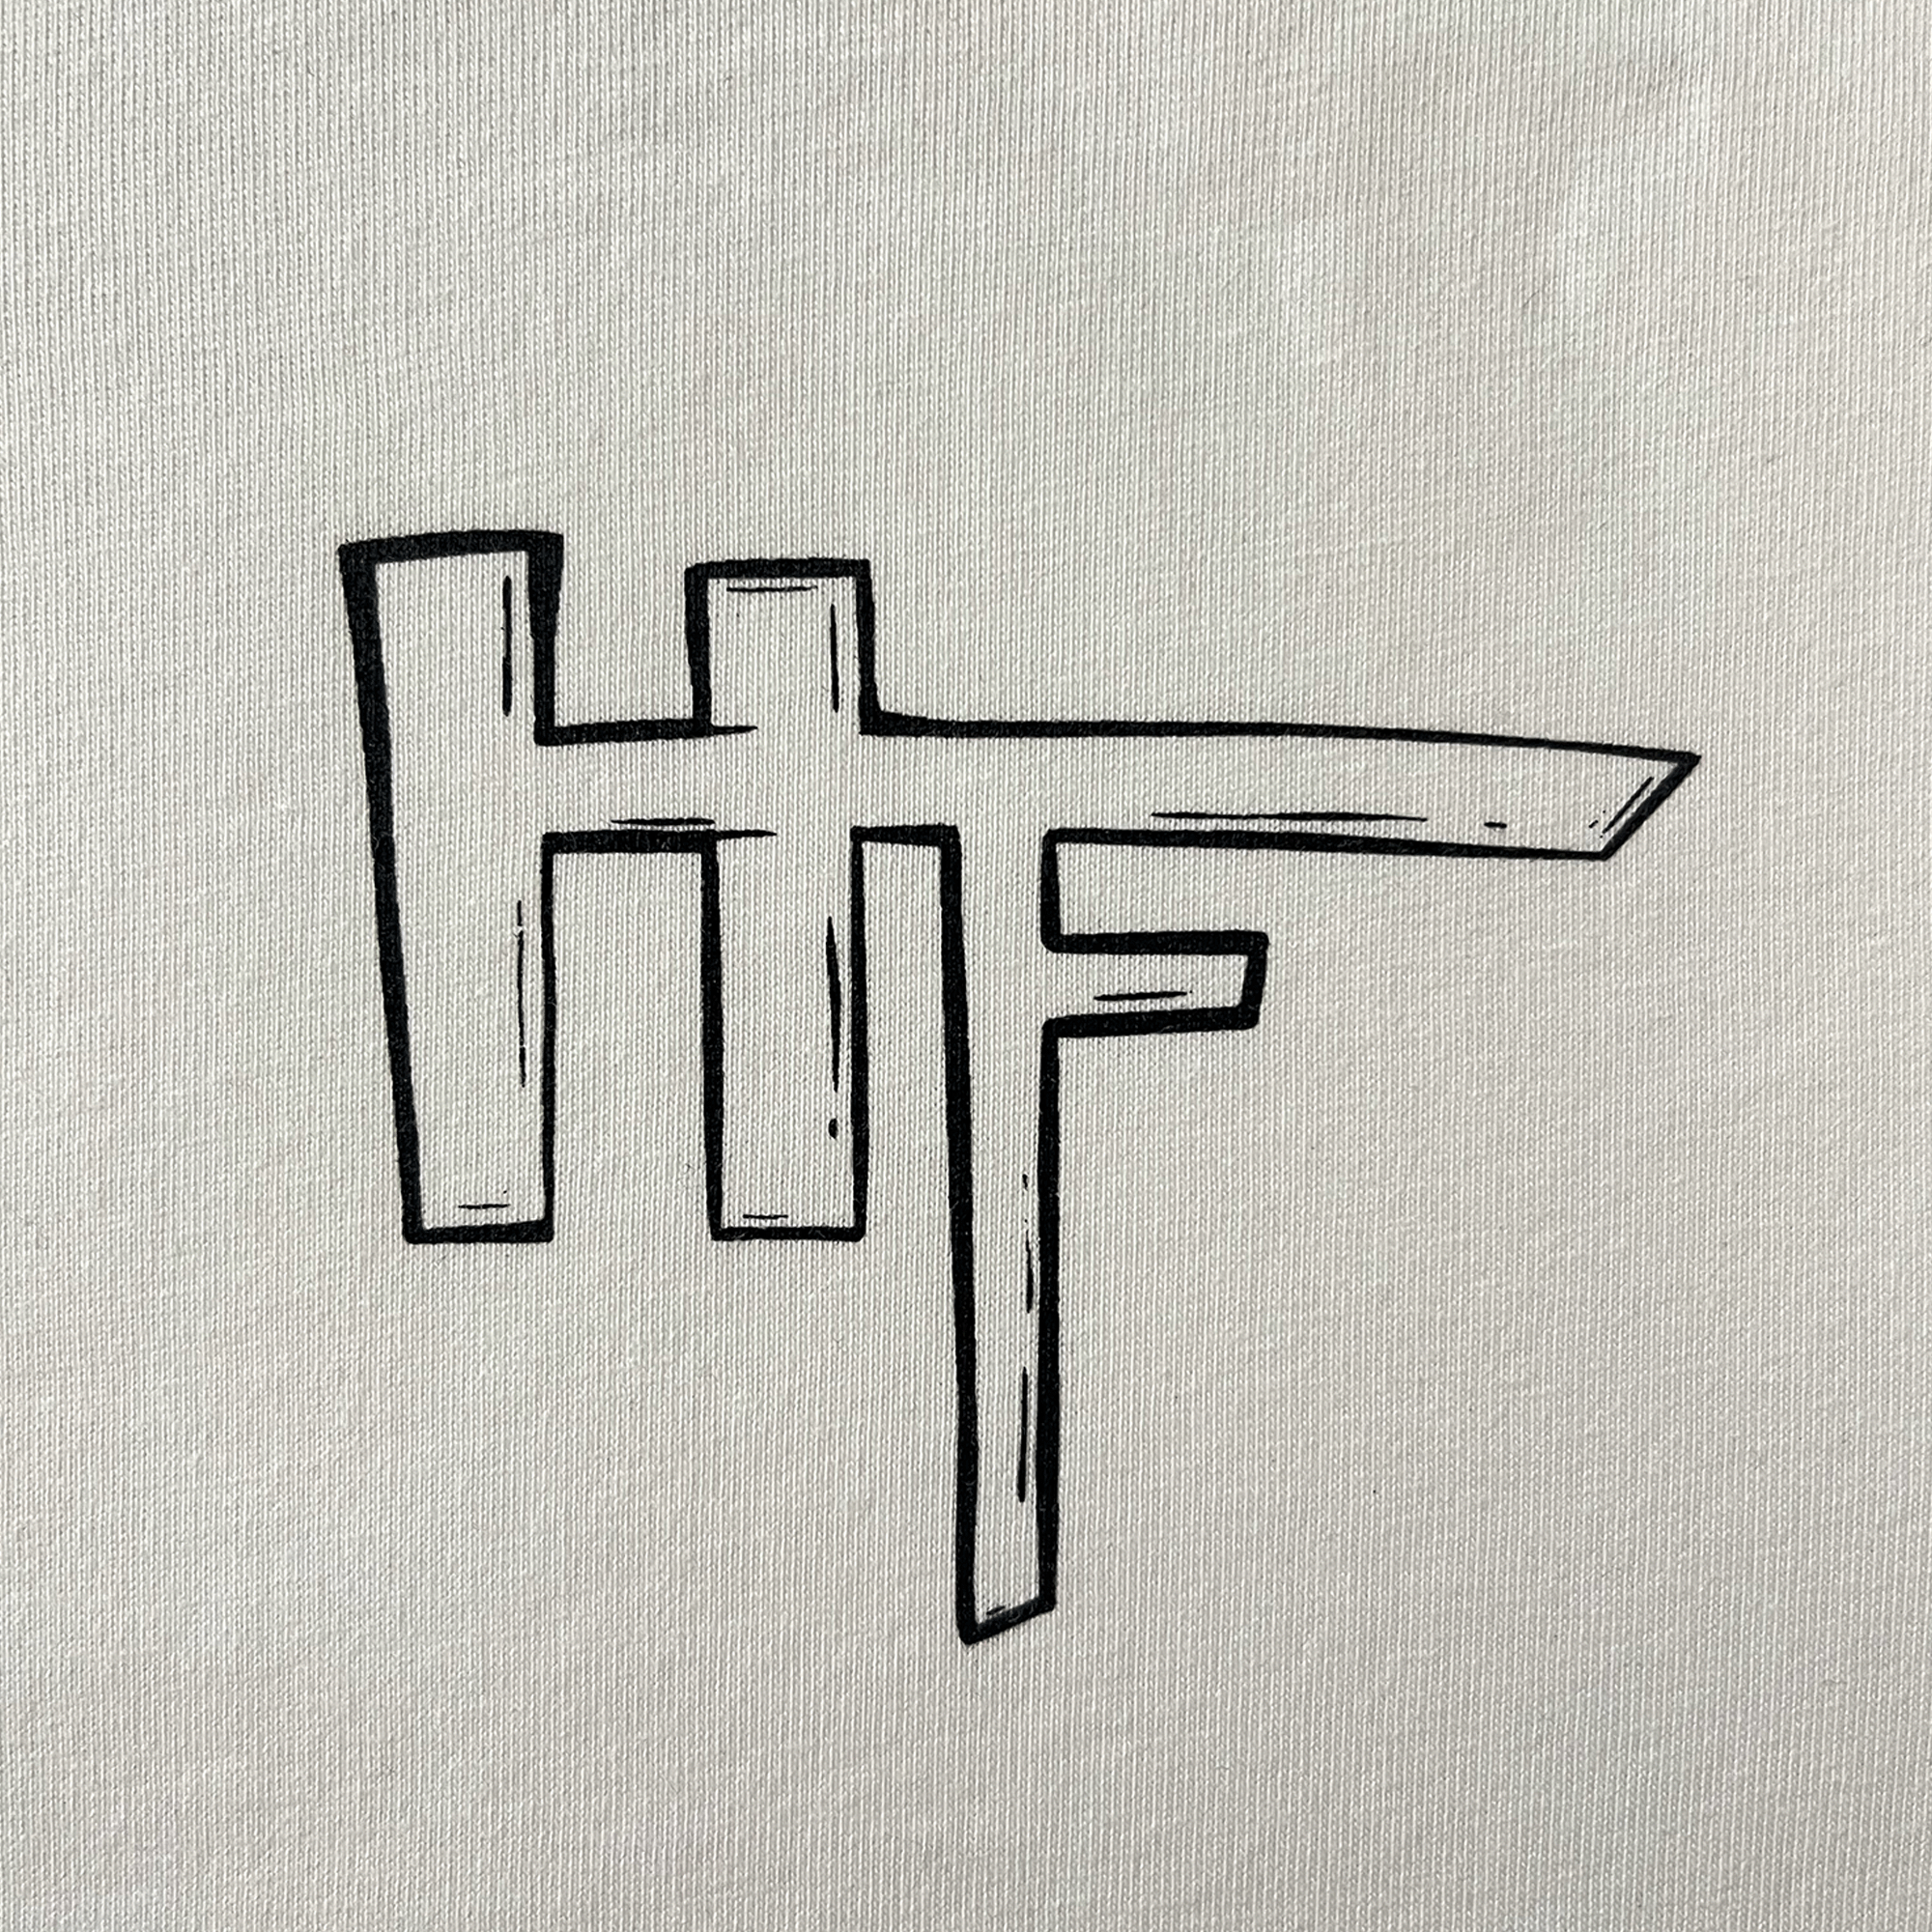 Close up of Oakland artist HellaFutures' signature on the front chest of a natural cotton color t-shirt.